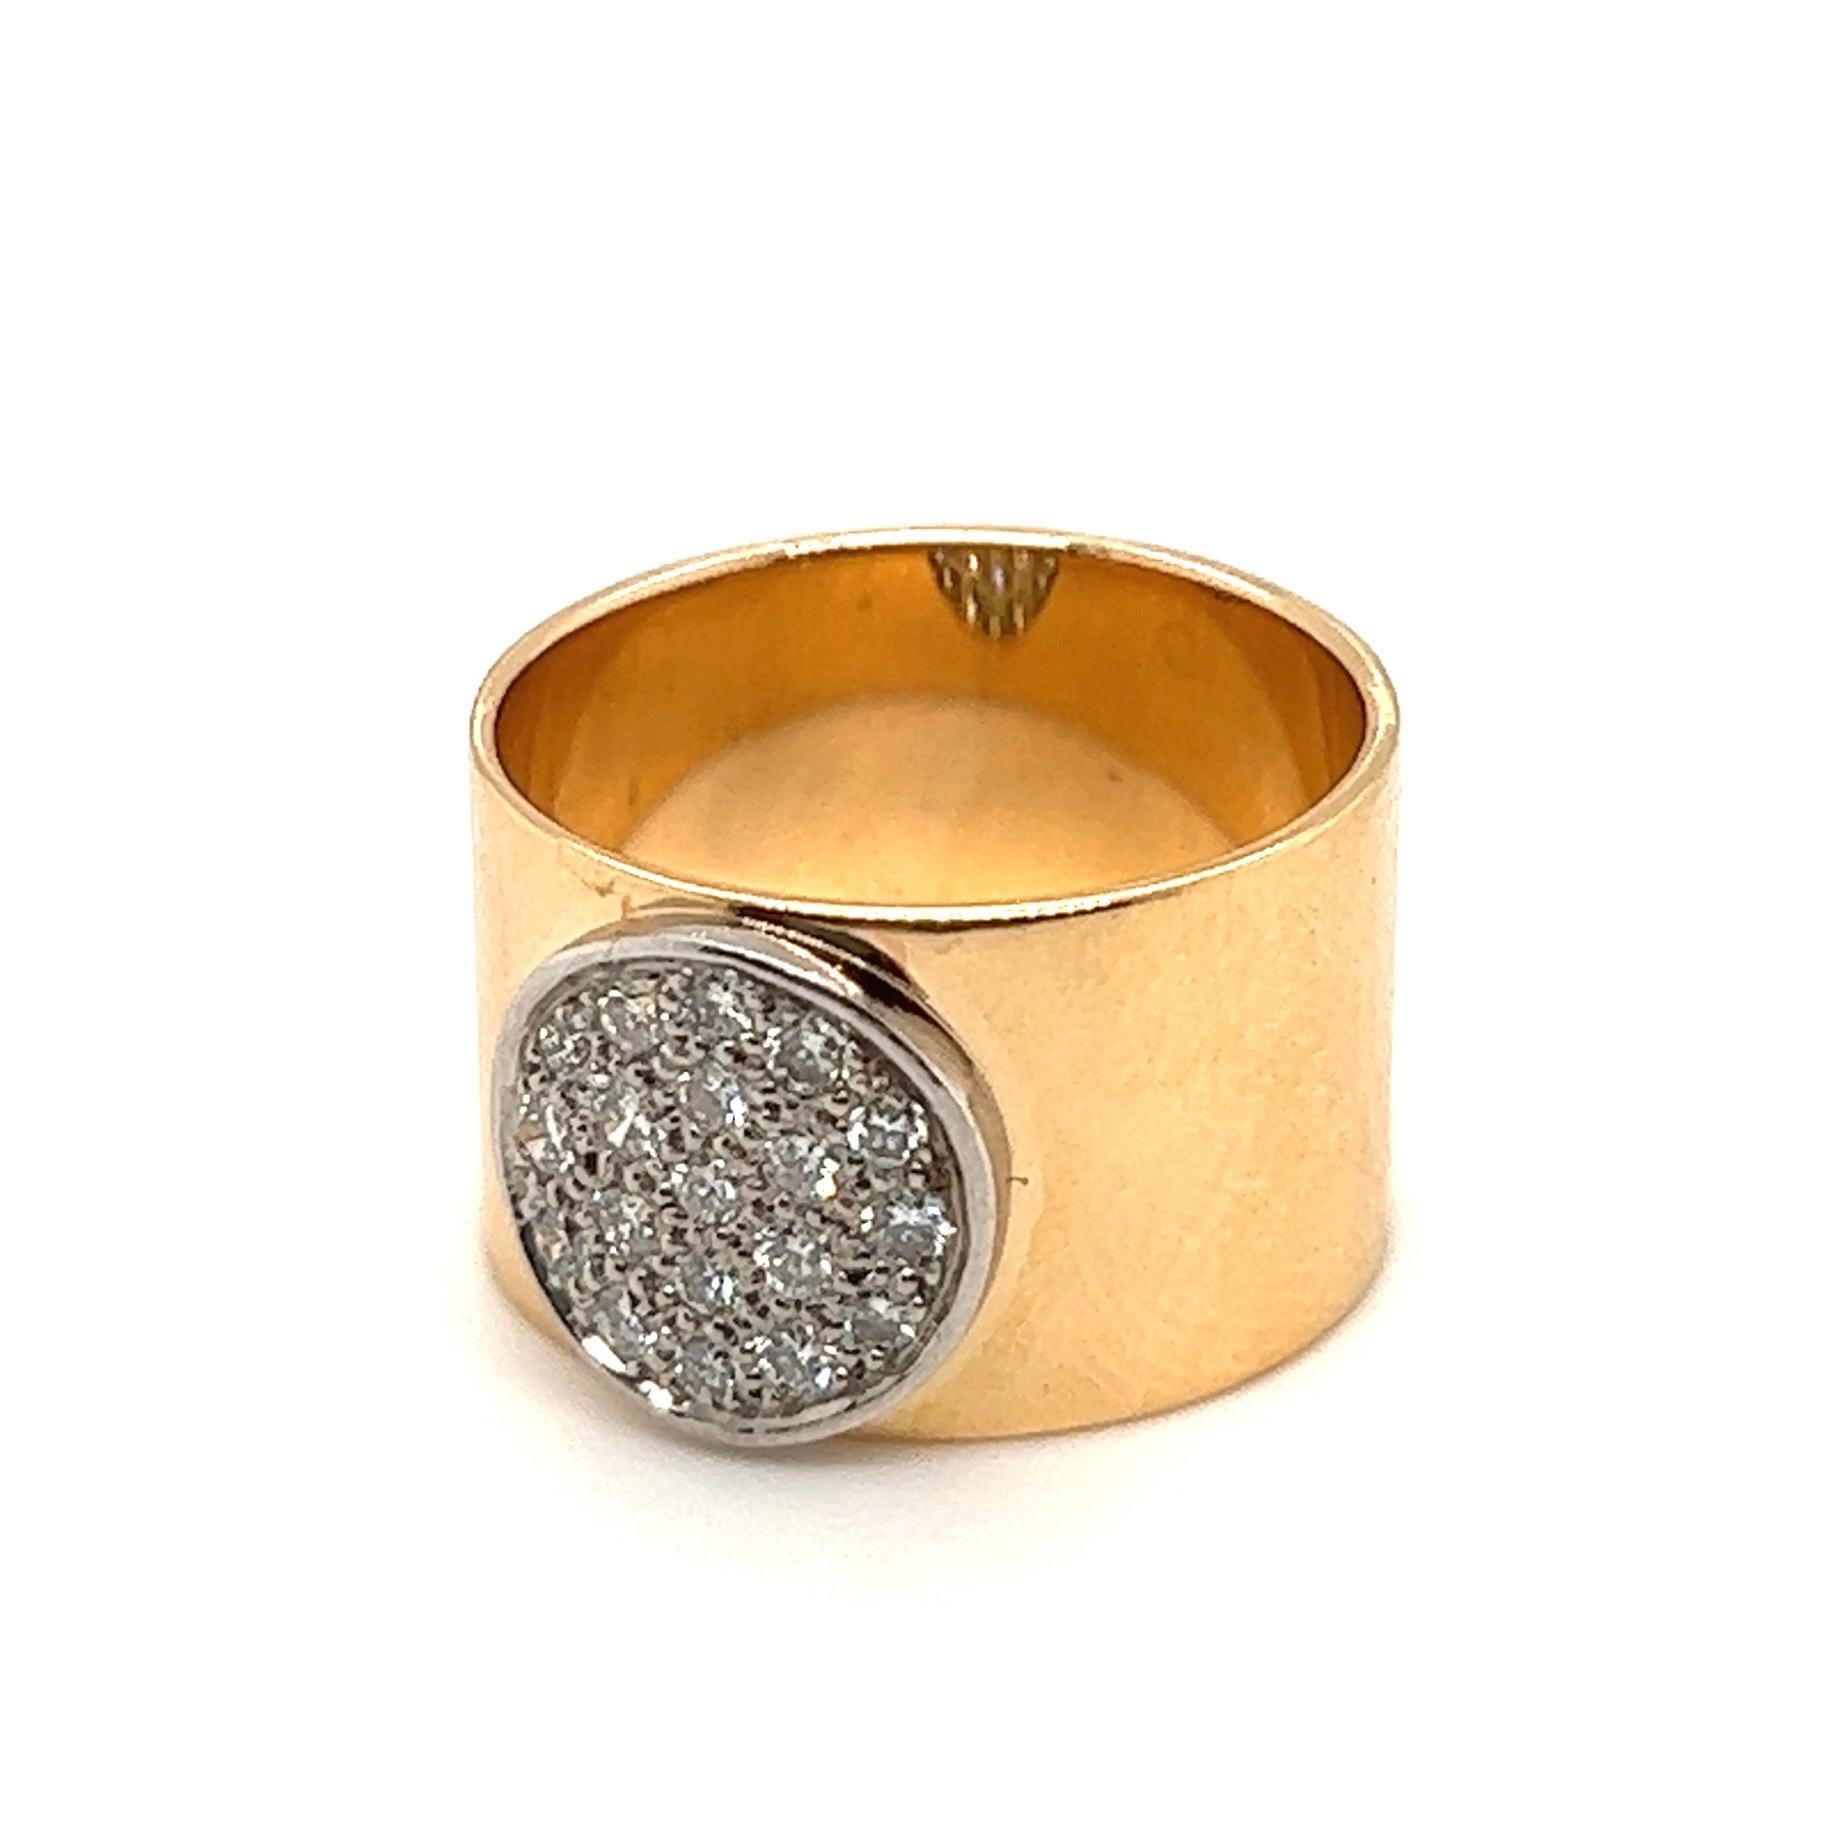 Very stylish 18 karat yellow gold platinum diamond band ring by Dinh Van.
Crafted in 18 karat yellow gold and designed as a wide band ring centered by a platinum disc set with brilliant-cut diamonds totalling circa 0.4 carats.
Jean Dinh Van is